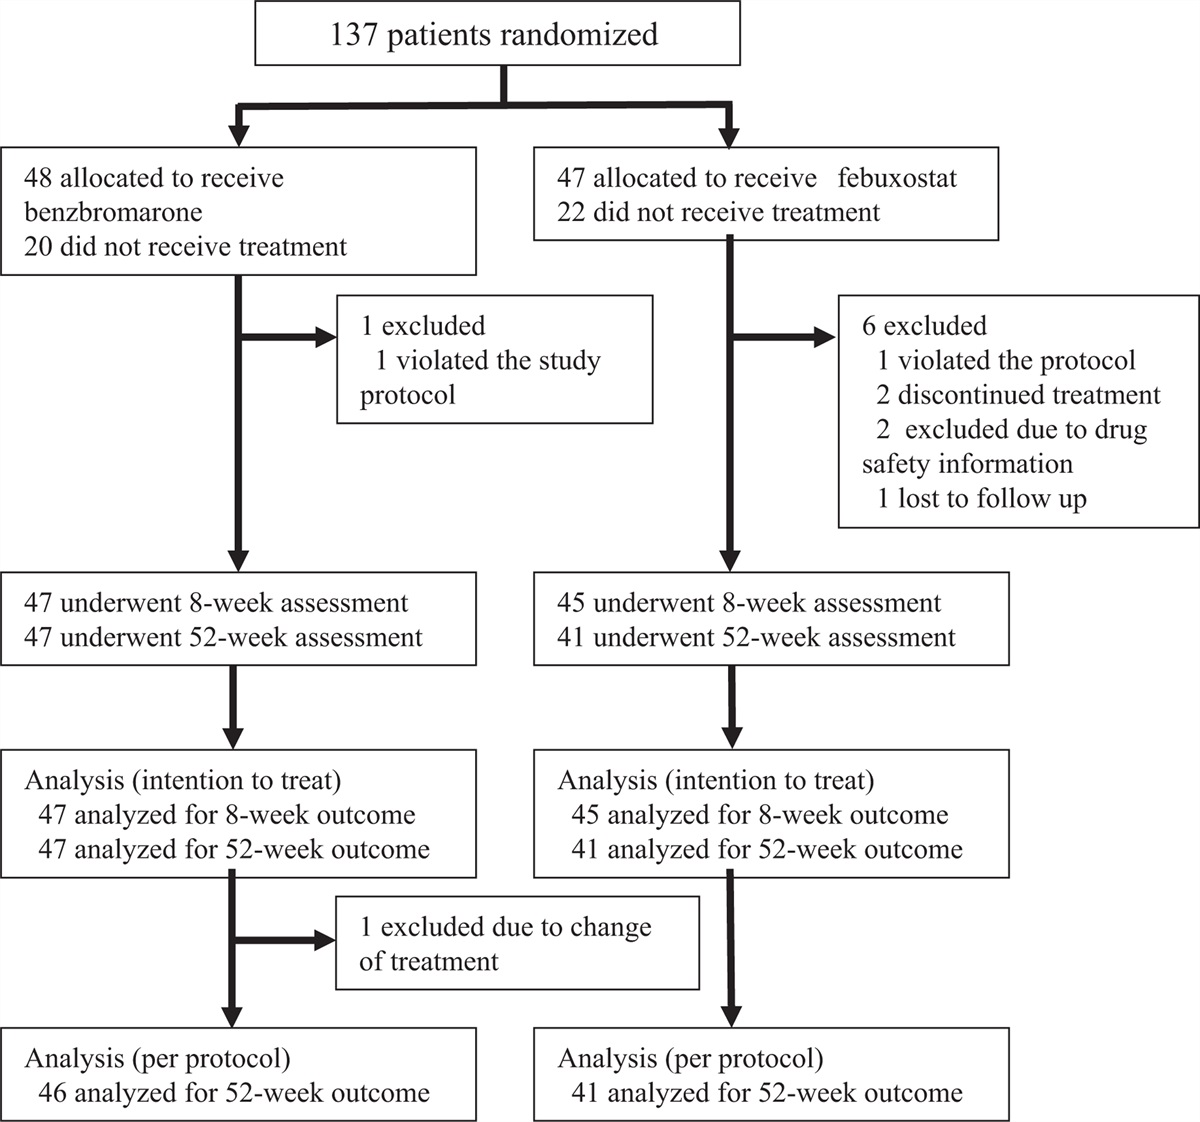 Urate-lowering drugs for chronic kidney disease with asymptomatic hyperuricemia and hypertension: a randomized trial